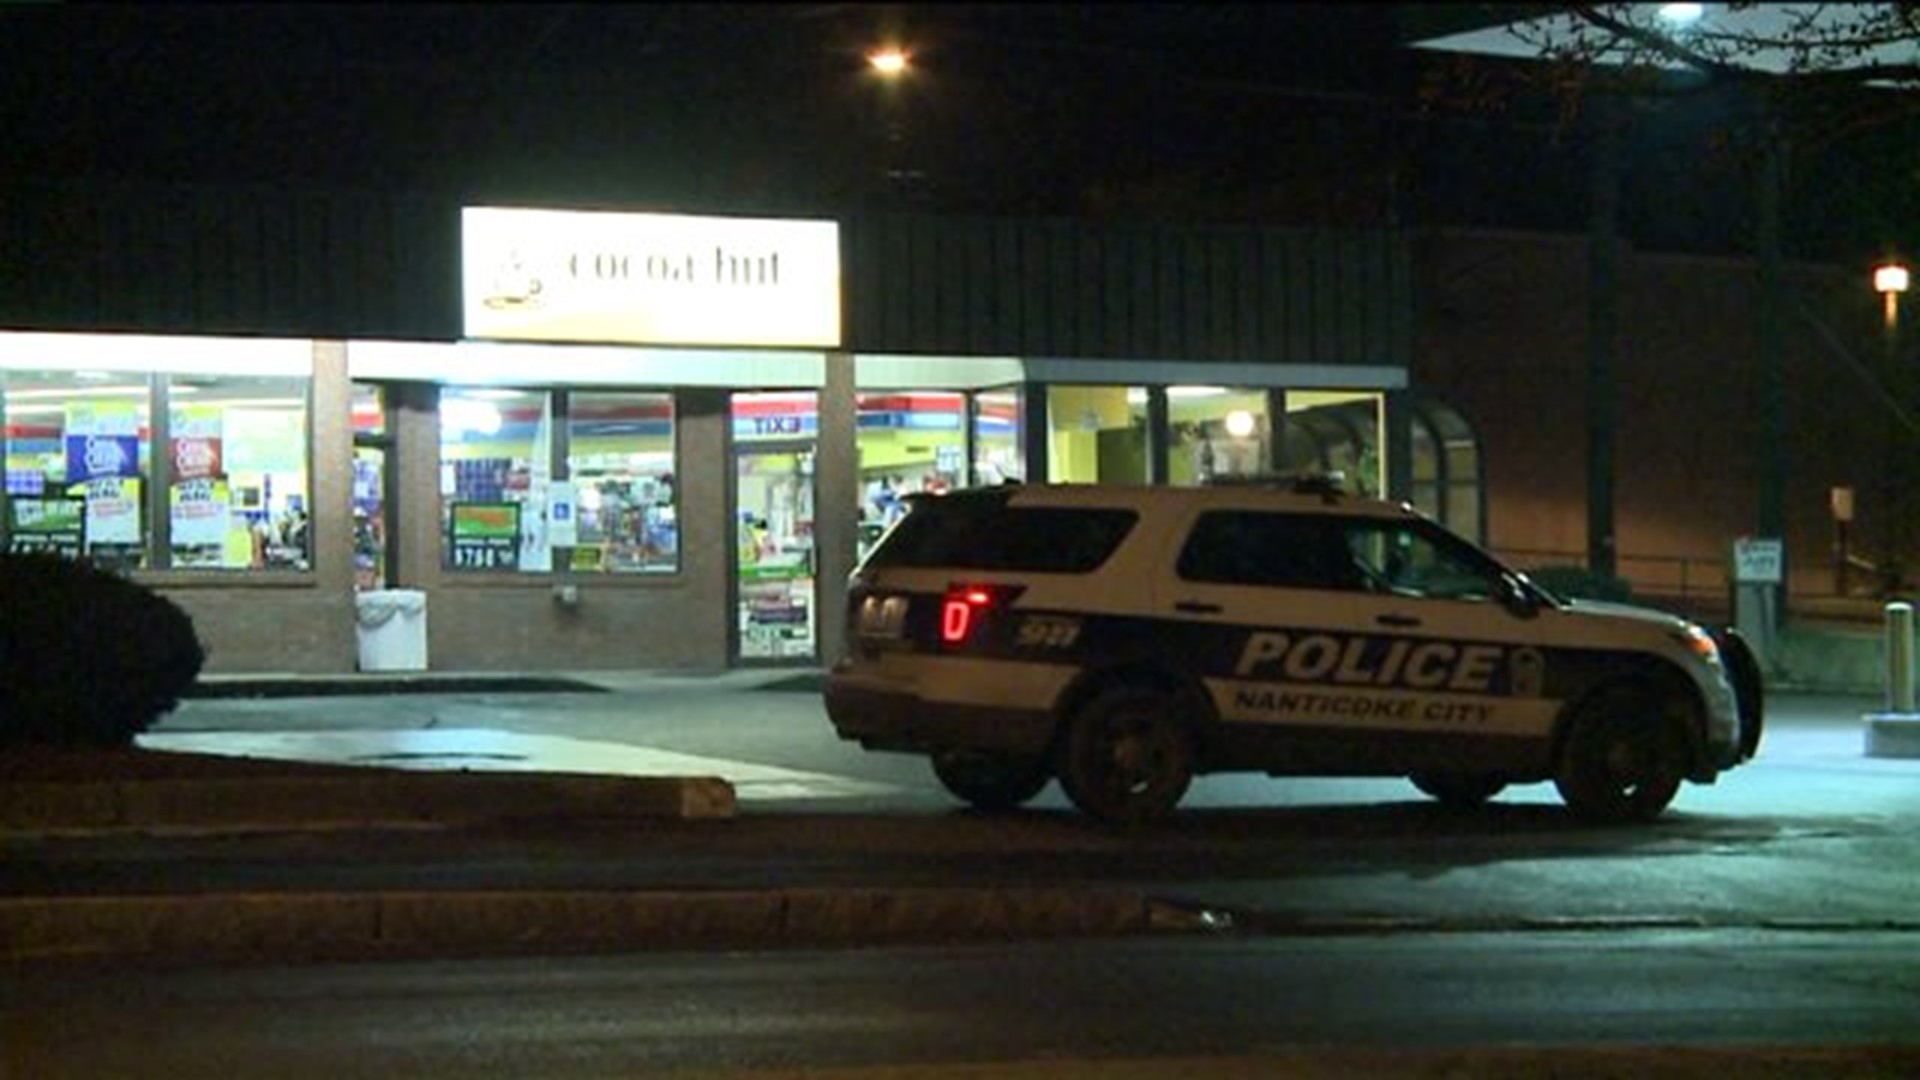 Convenience Store Robbed in Nanticoke